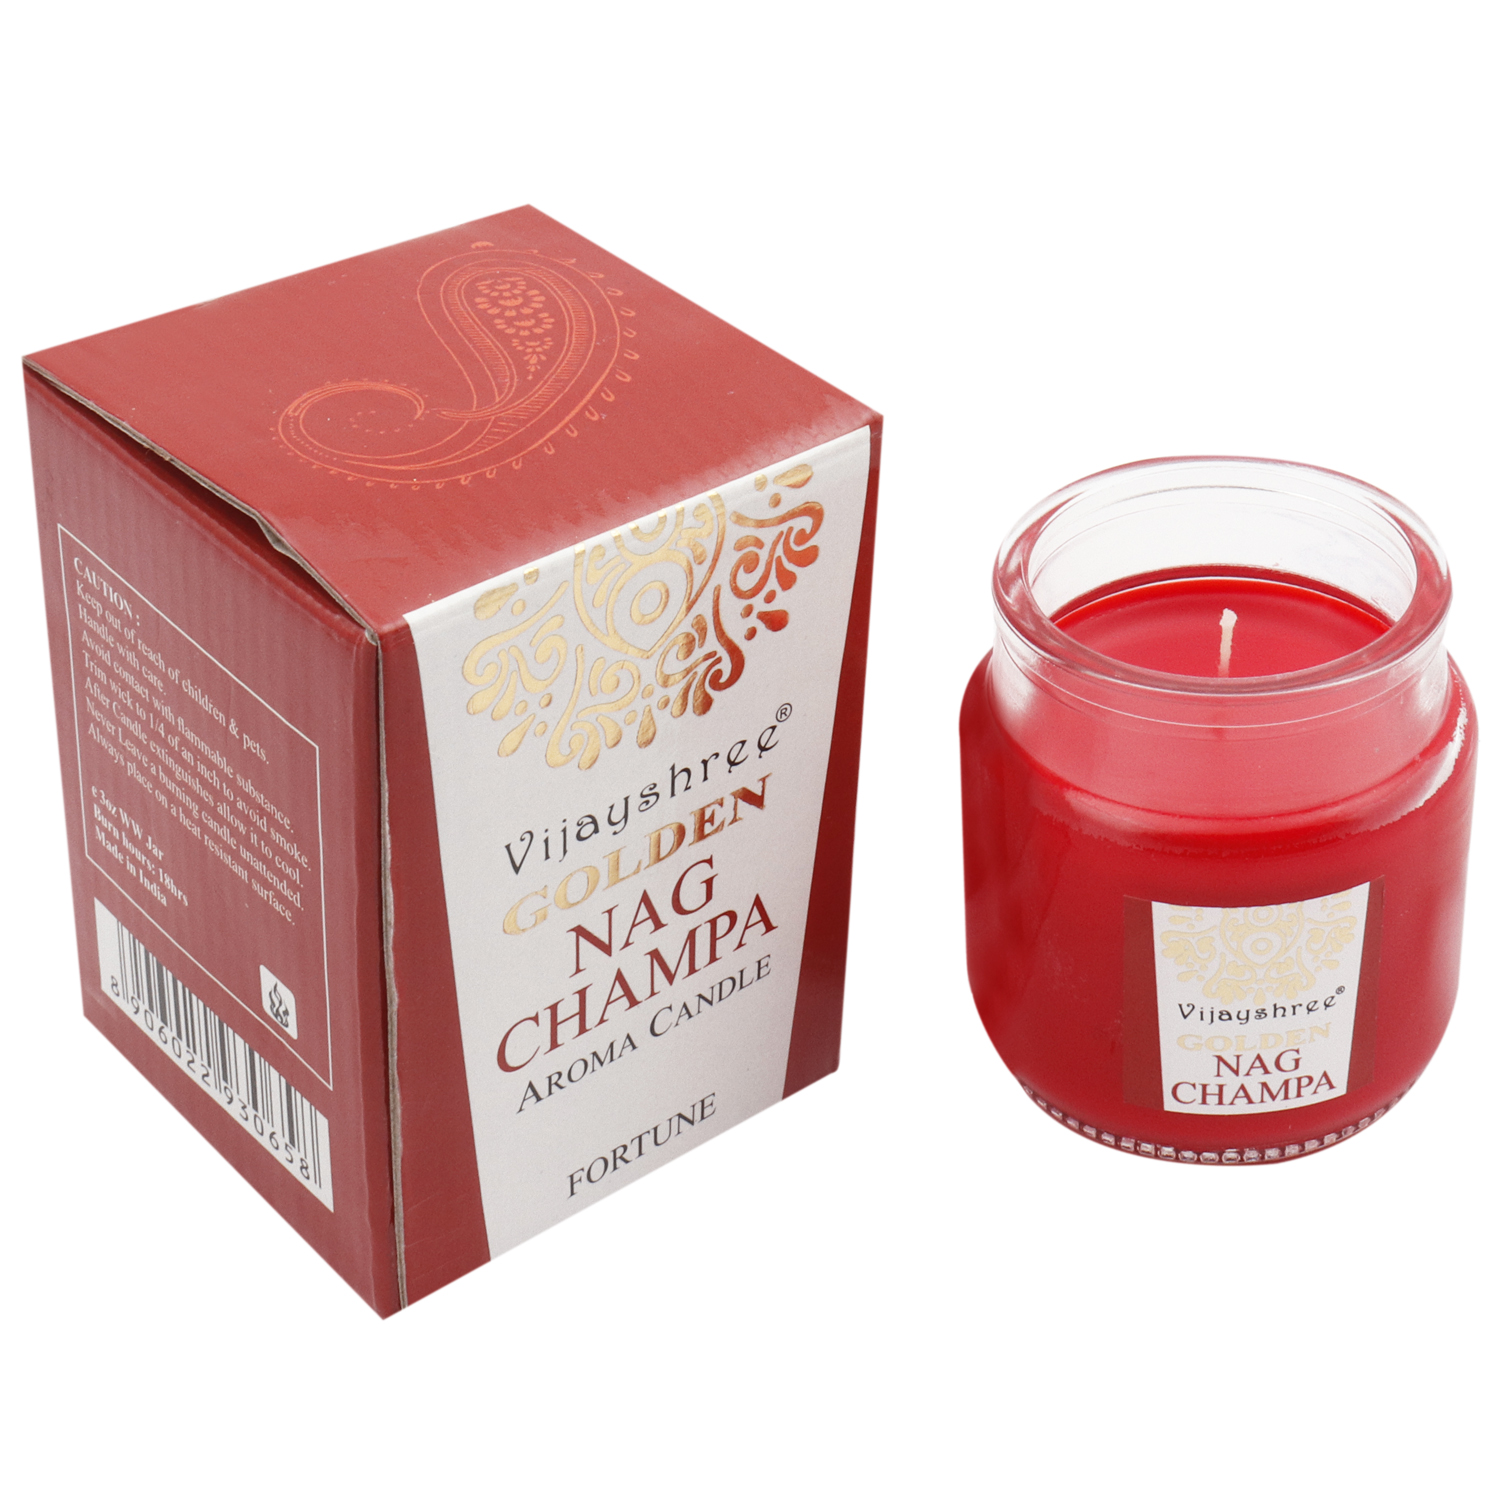 Aroma Candle - Fortune